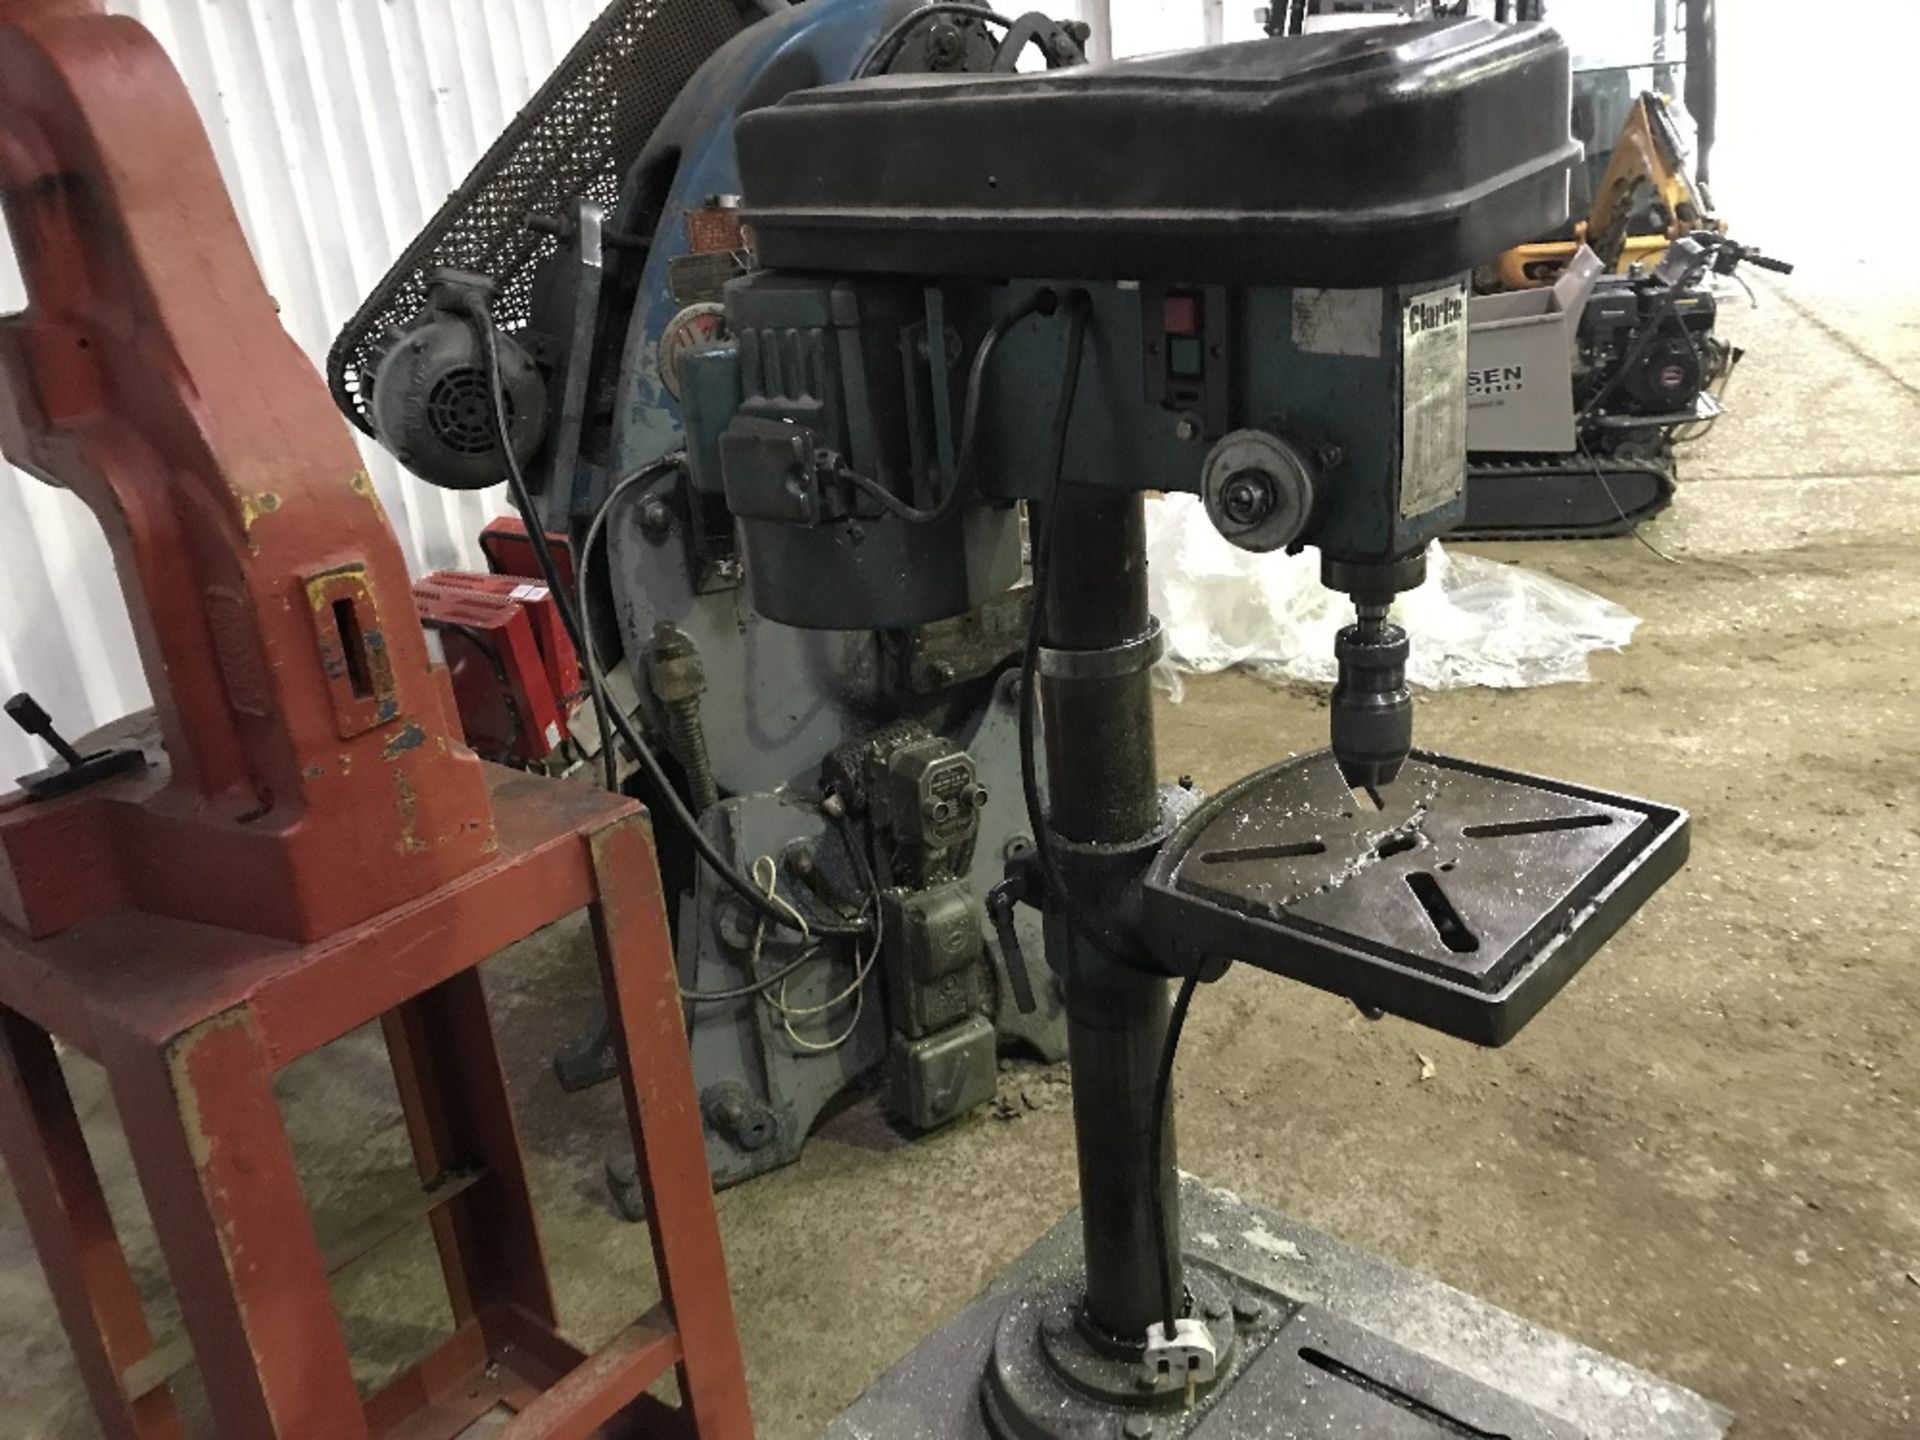 CLARKE METAL WORKER PILLAR DRILL, RECENTLY REMOVED FROM WORKING ENVIRONMENT - Image 2 of 2